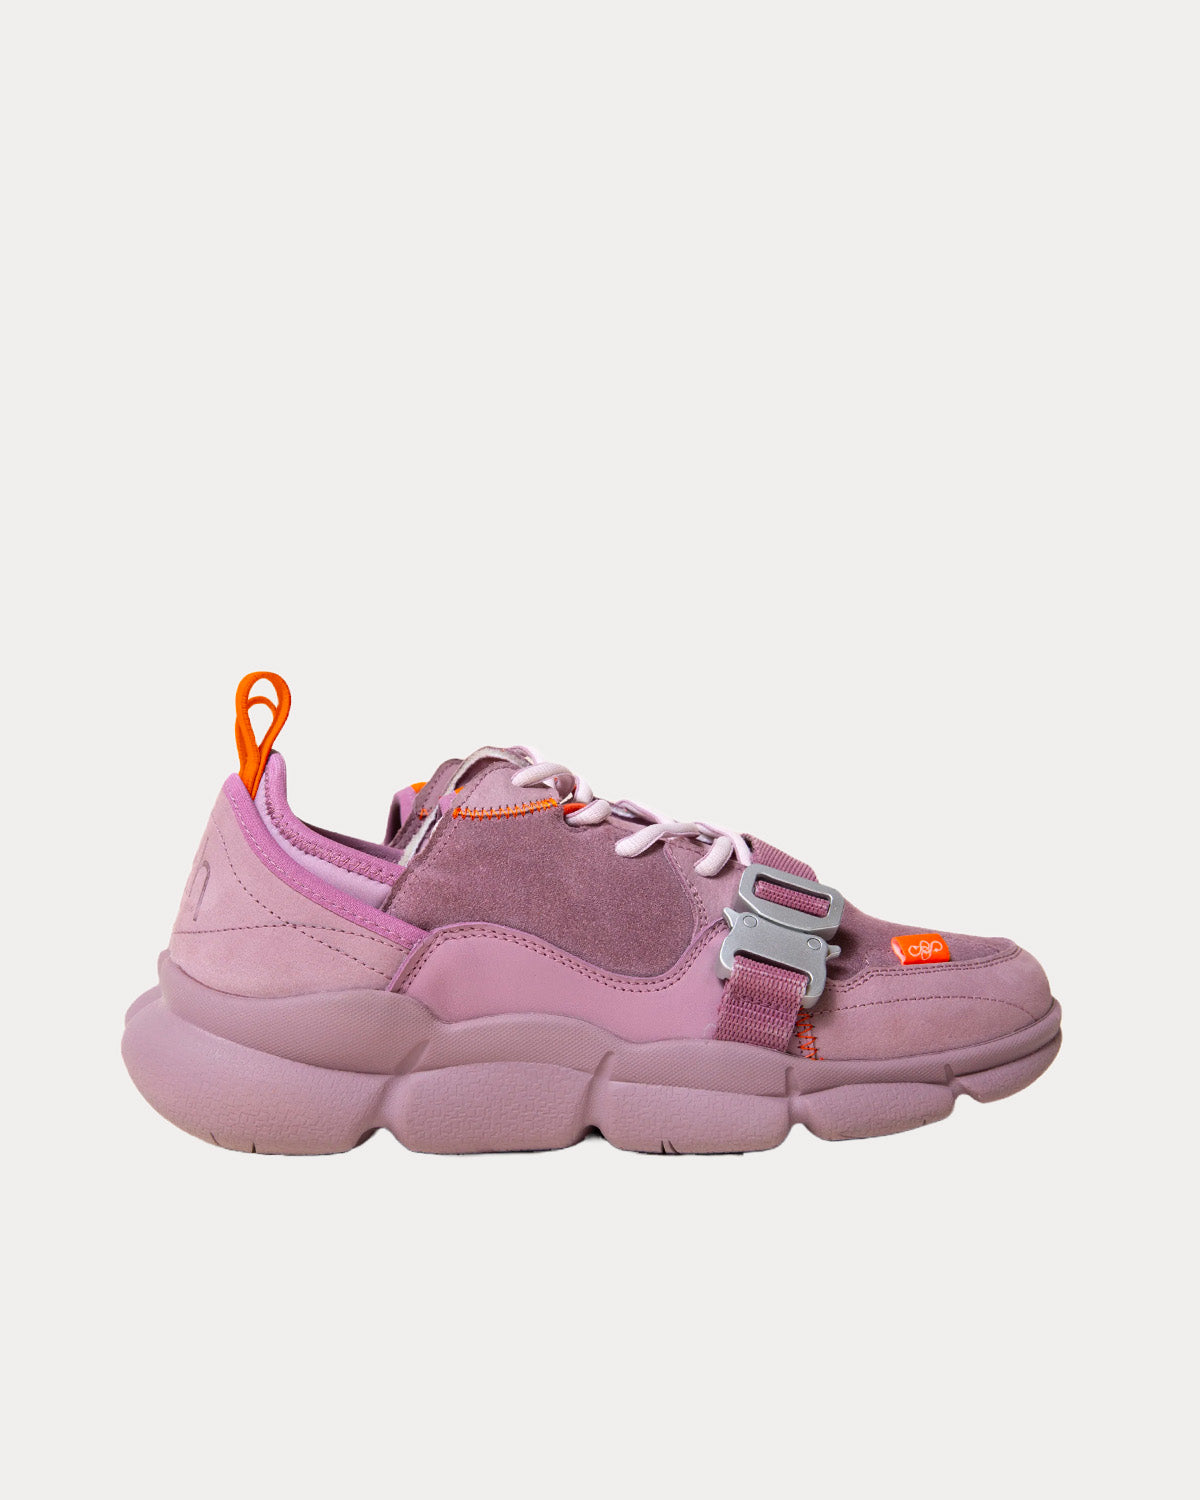 Lilith NYC - Caudal Lure Purple Sunsets Low Top Sneakers